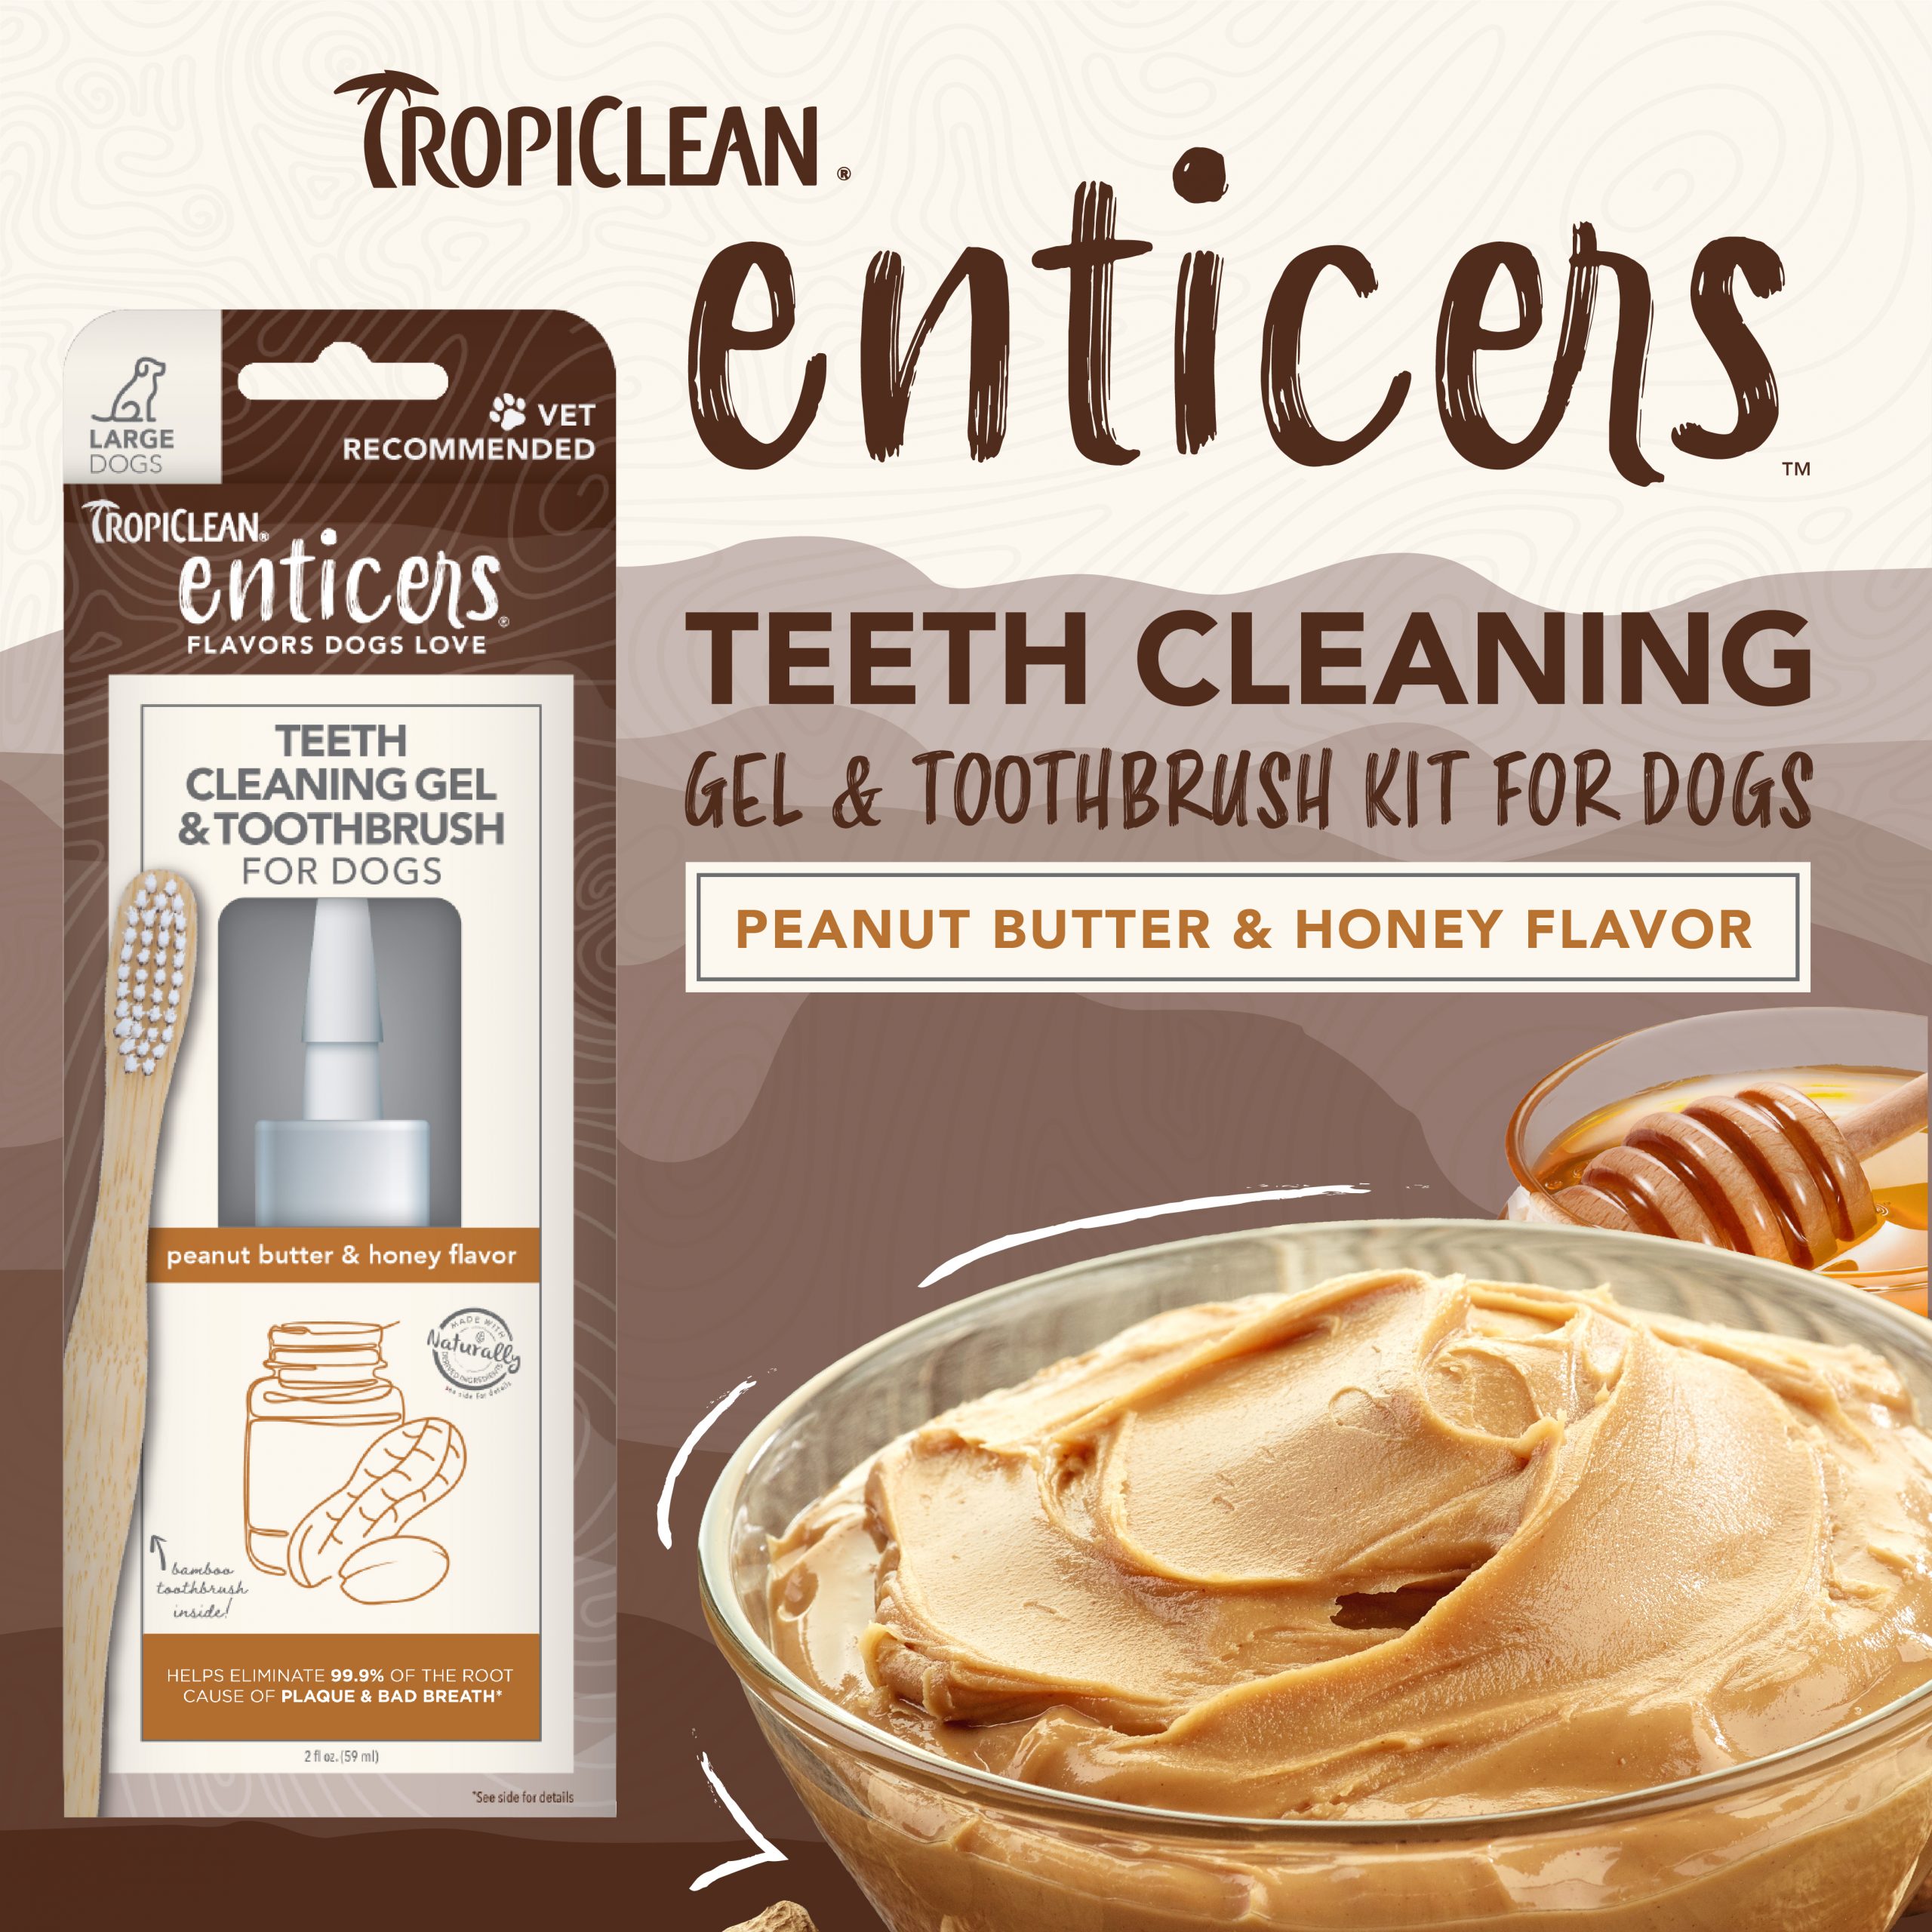 Teeth Cleaning Gel & Toothbrush for Large Dogs – Peanut Butter & Honey Flavor